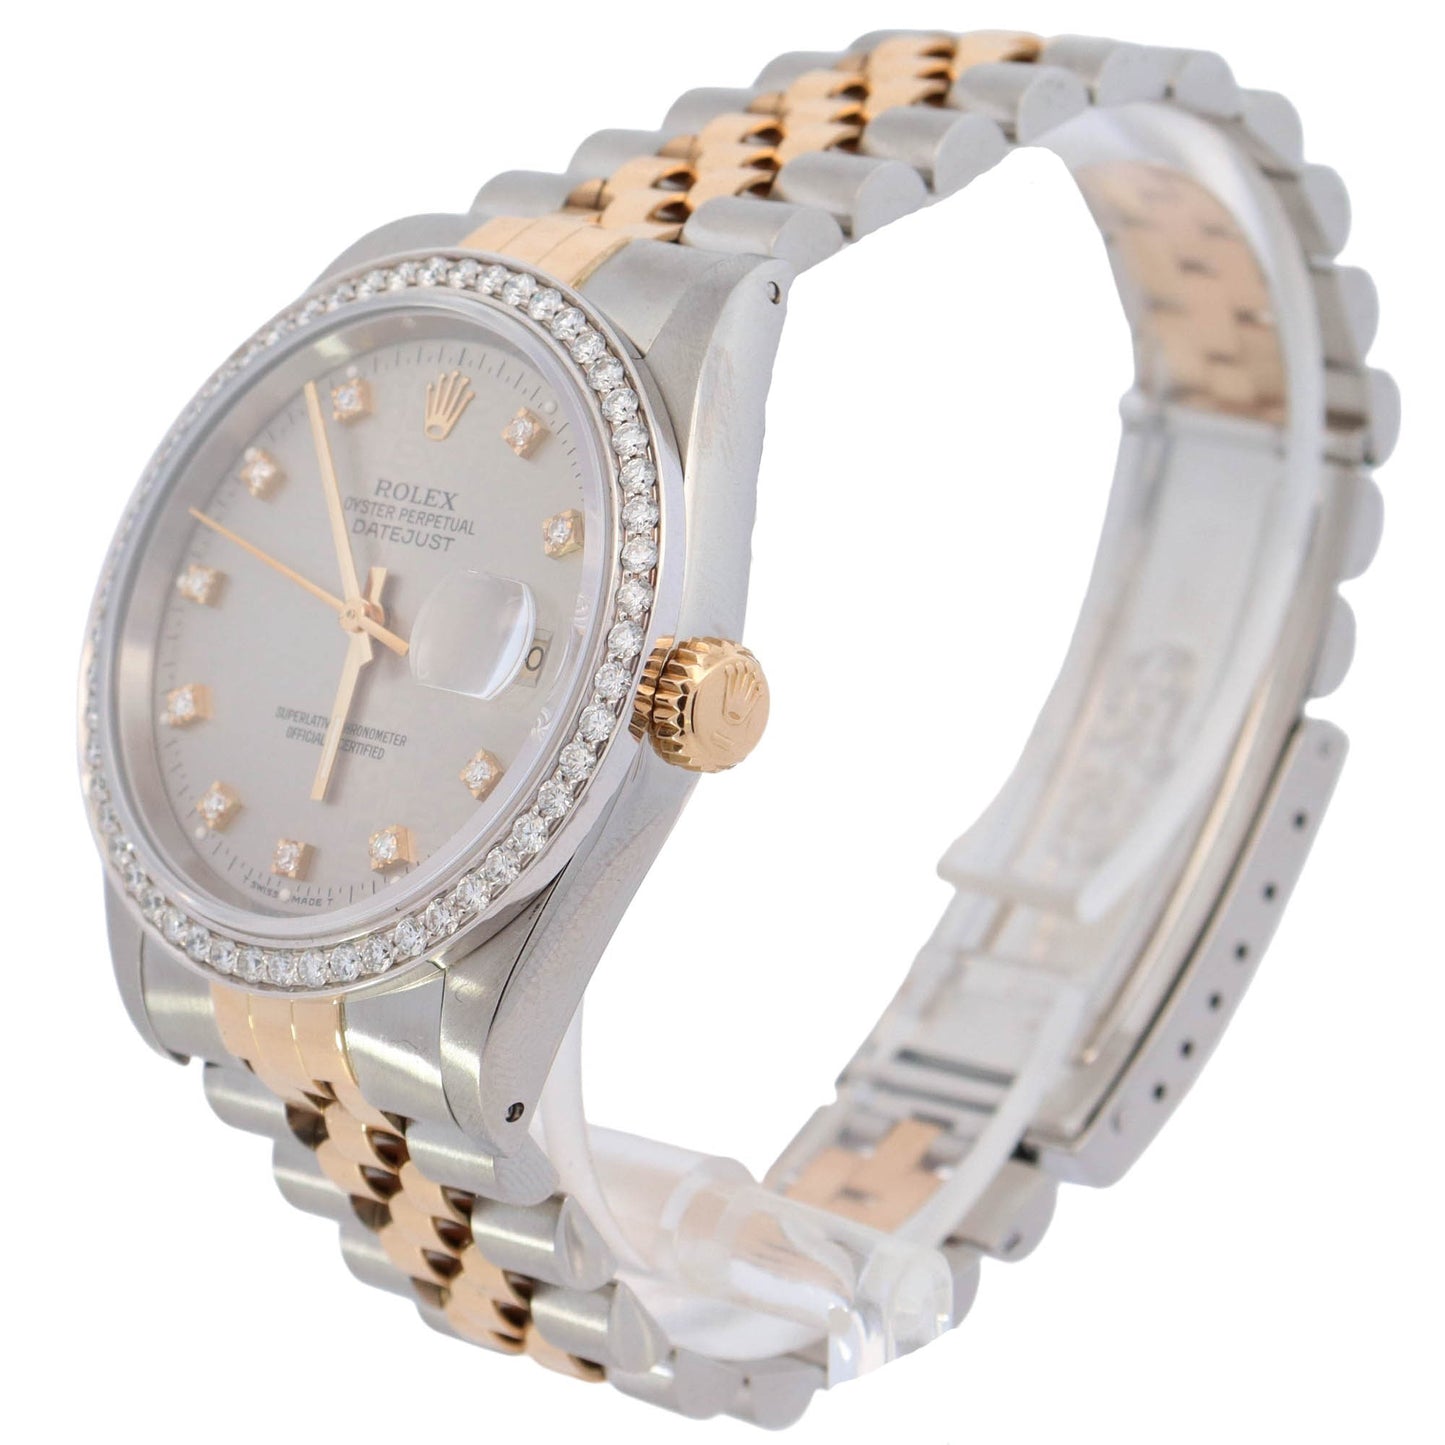 Rolex Datejust Two-Tone Stainless Steel & Yellow Gold 36mm Silver Diamond Dot Dial Watch Reference# 16233 - Happy Jewelers Fine Jewelry Lifetime Warranty